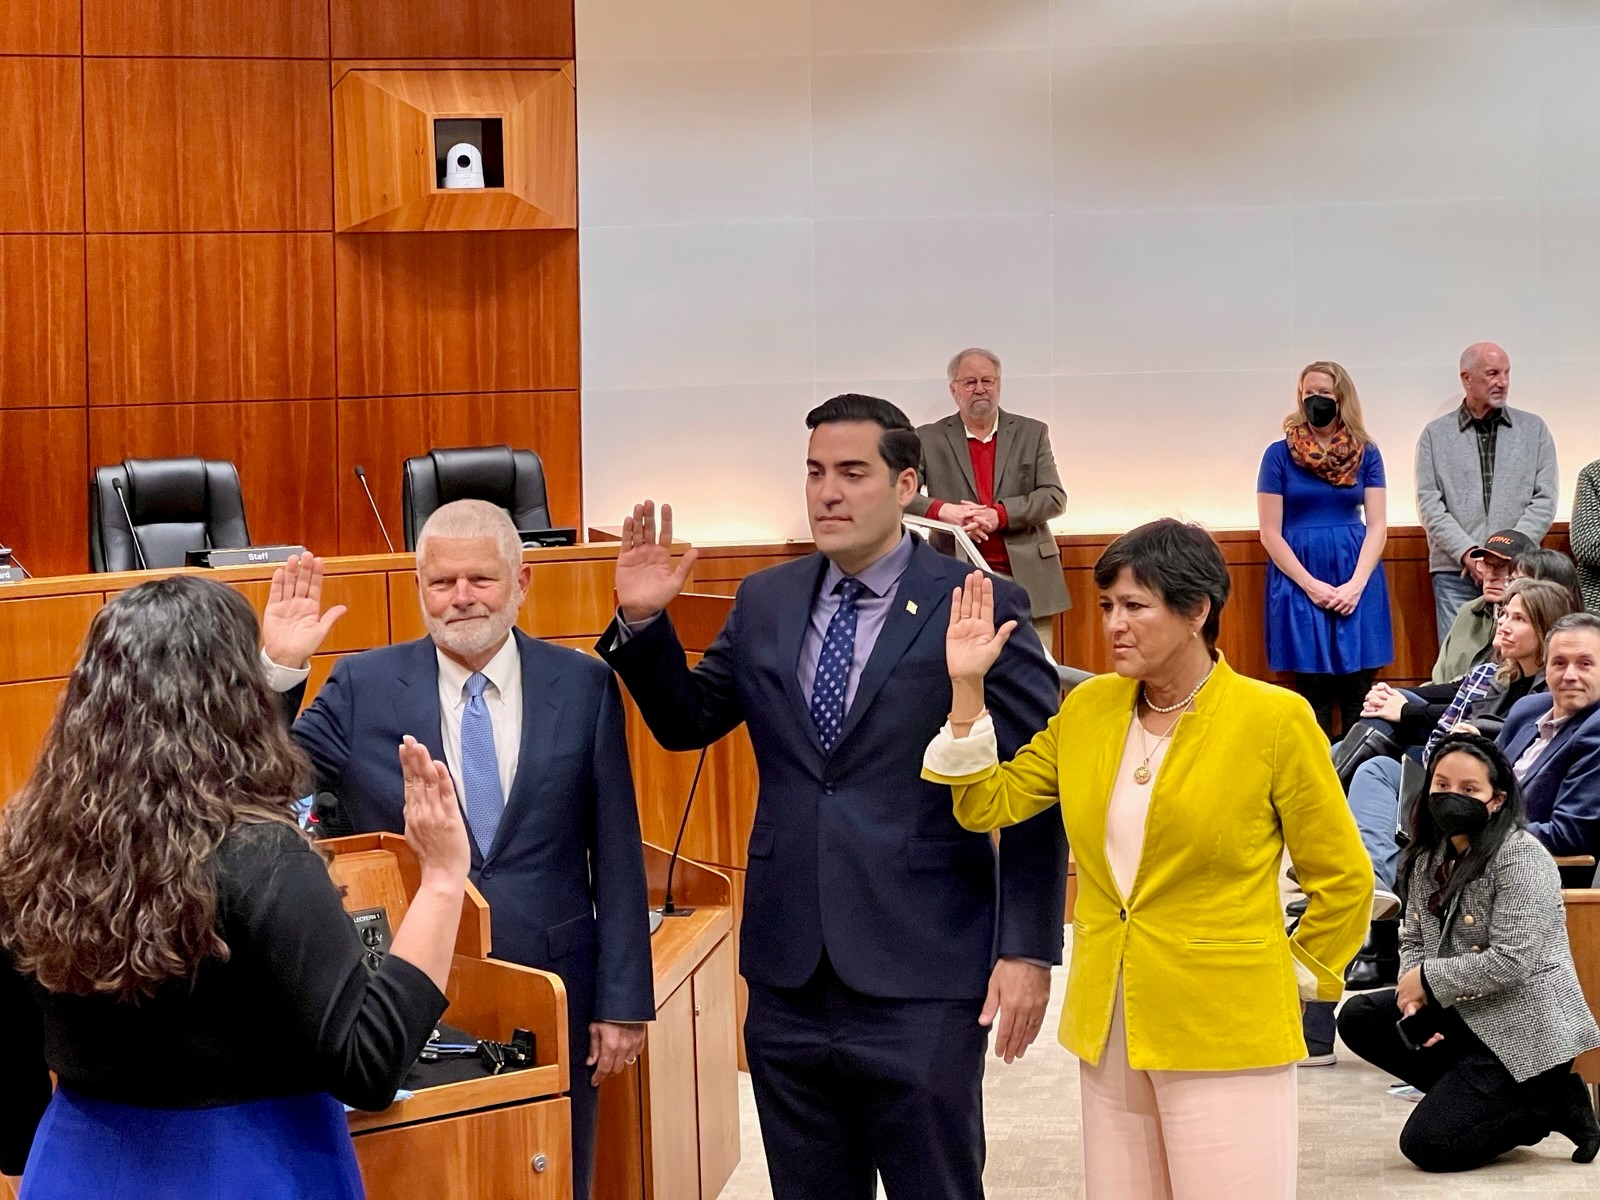 The County of San Luis Obispo Board chambers Click to view article, Swearing In on January 3rd, 2023 